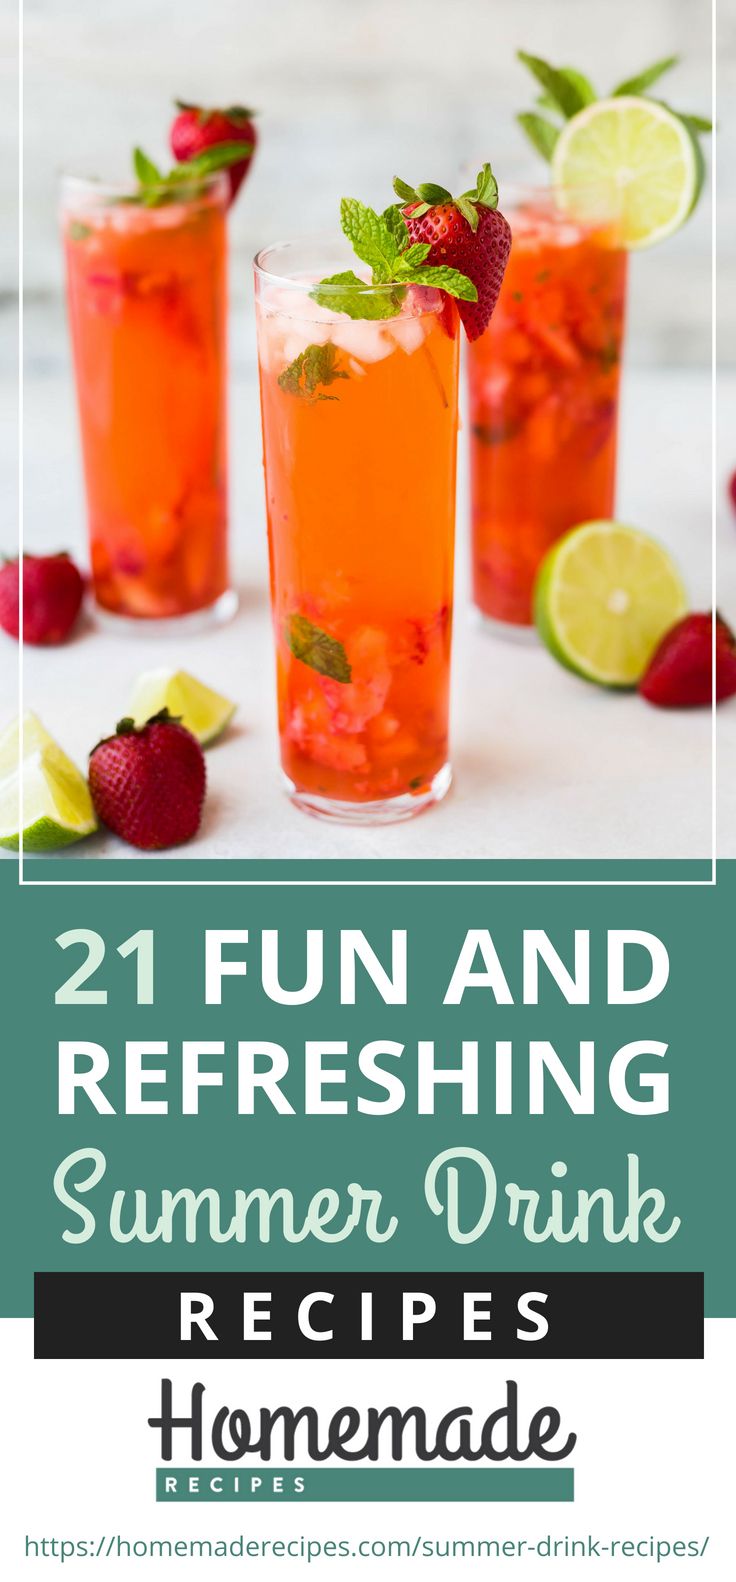 Pinterest Placard | Fun And Refreshing Summer Drink Recipes | Homemade Recipes | summer drinks alcoholic